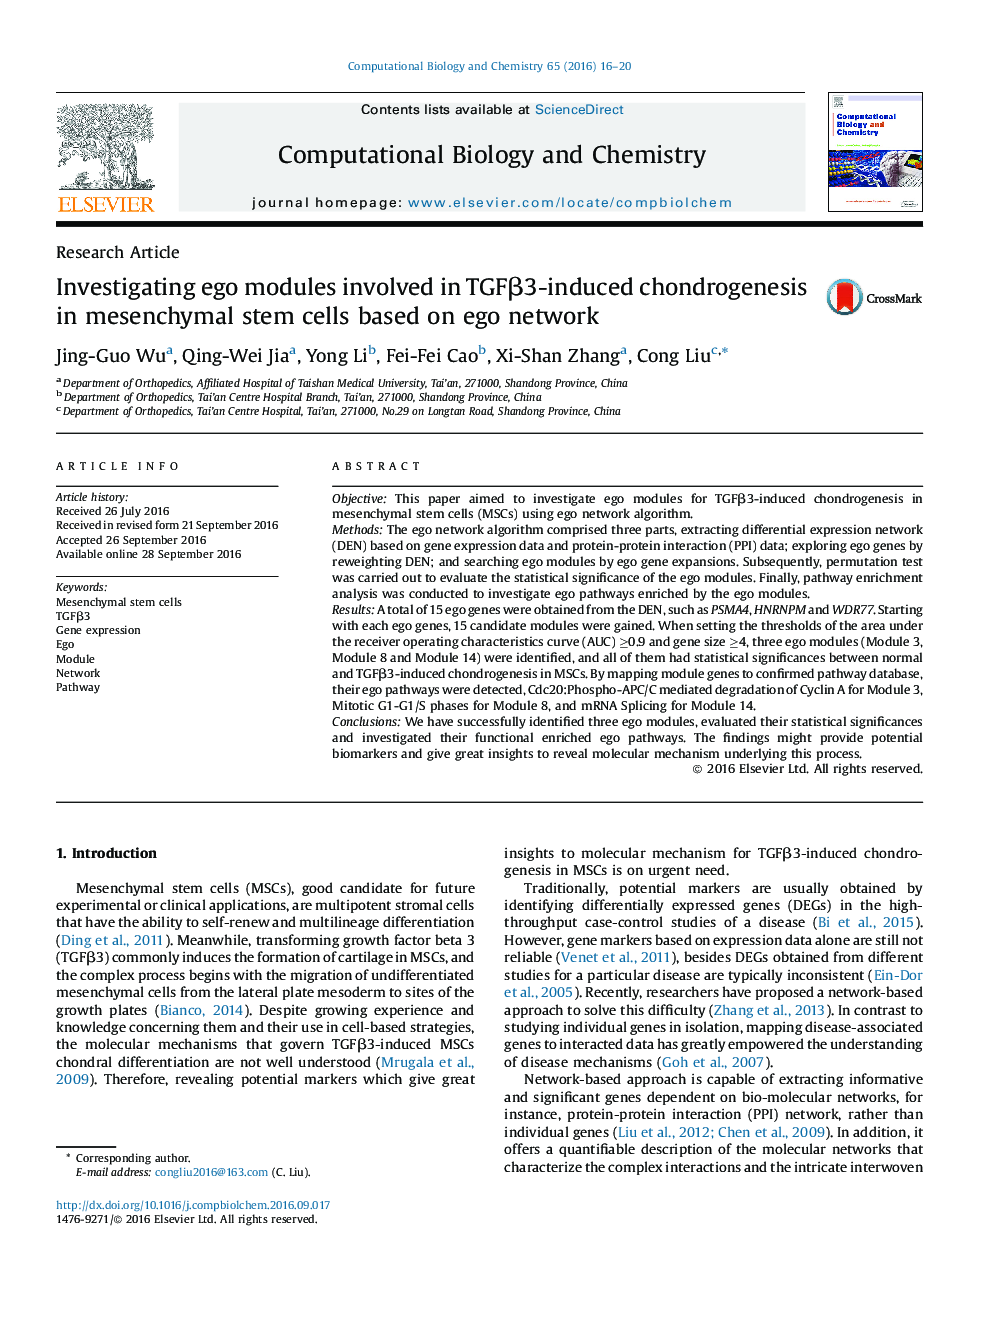 Research ArticleInvestigating ego modules involved in TGFÎ²3-induced chondrogenesis in mesenchymal stem cells based on ego network